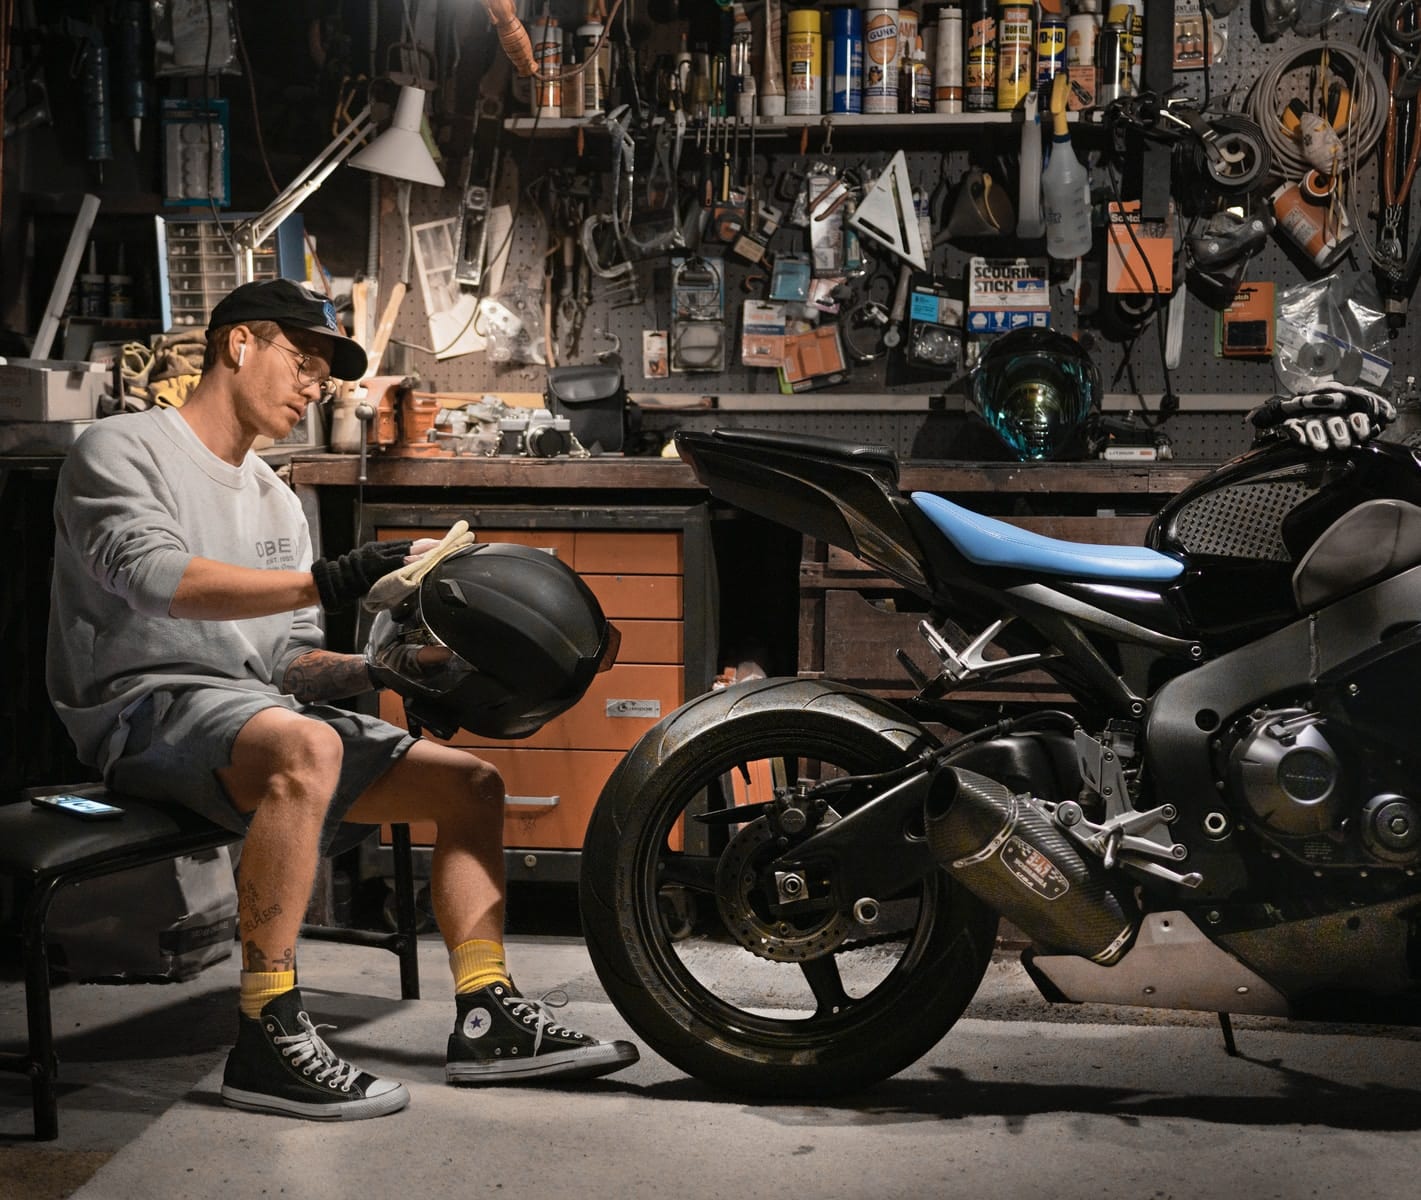 15 Reasons Your Motorcycle Won't Start: Diagnosed Problems & Solutions